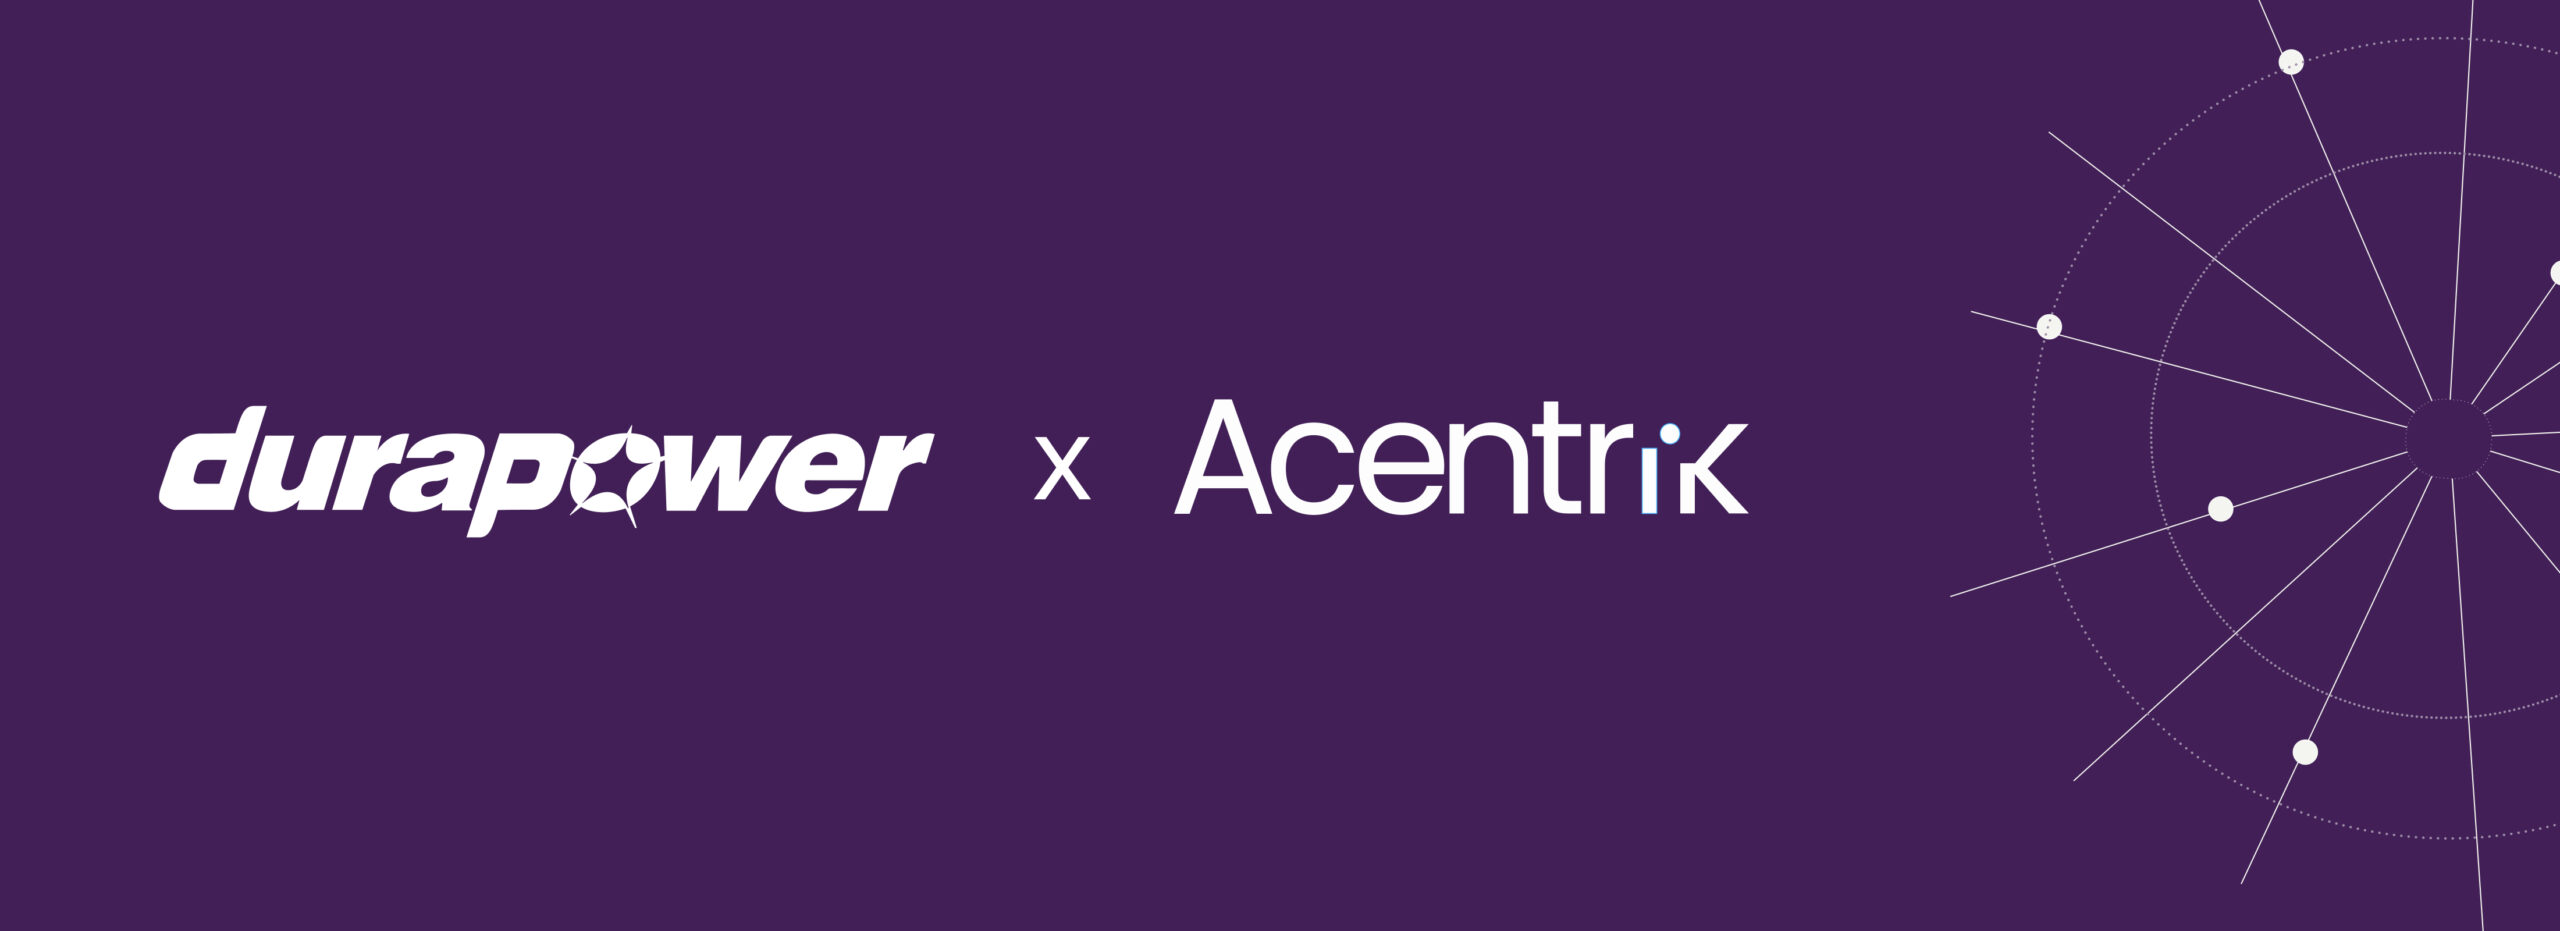 Acentrik signs MOU with Durapower on transforming data sharing in EV and battery sectors.